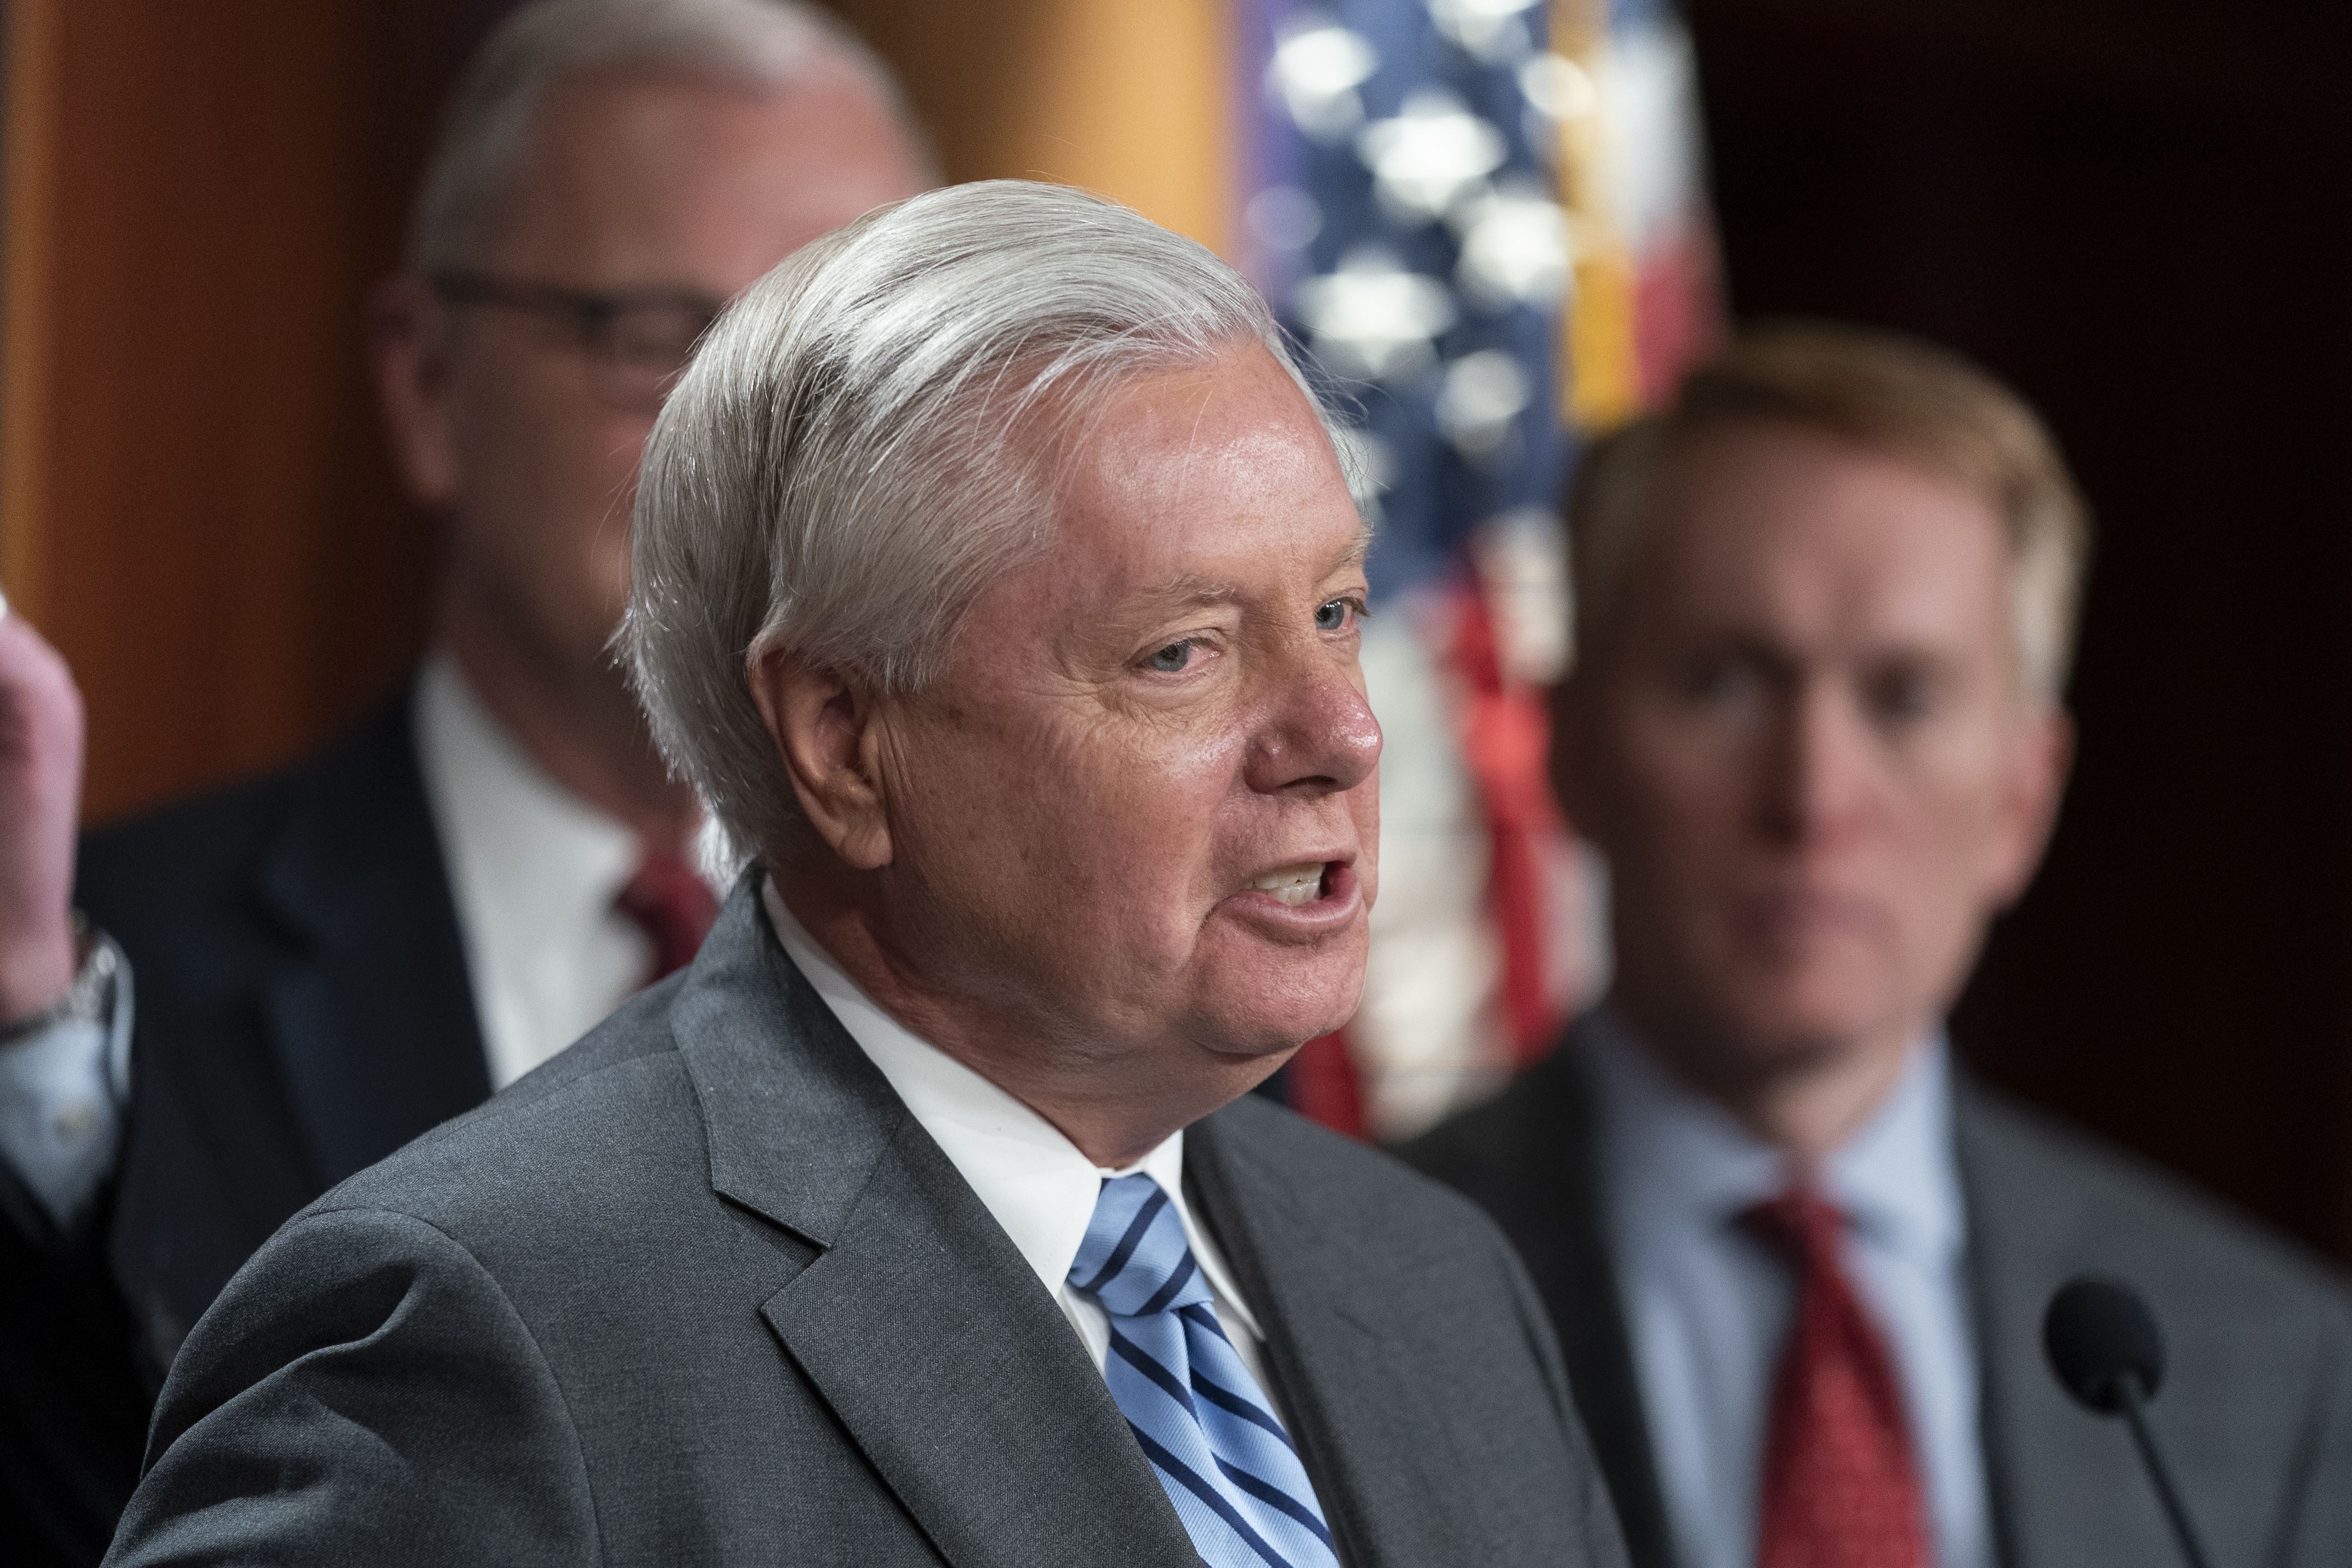 Graham rips Biden ‘slow-walking’ jets for Ukraine, supports no-fly zone if Russia uses chemical weapons